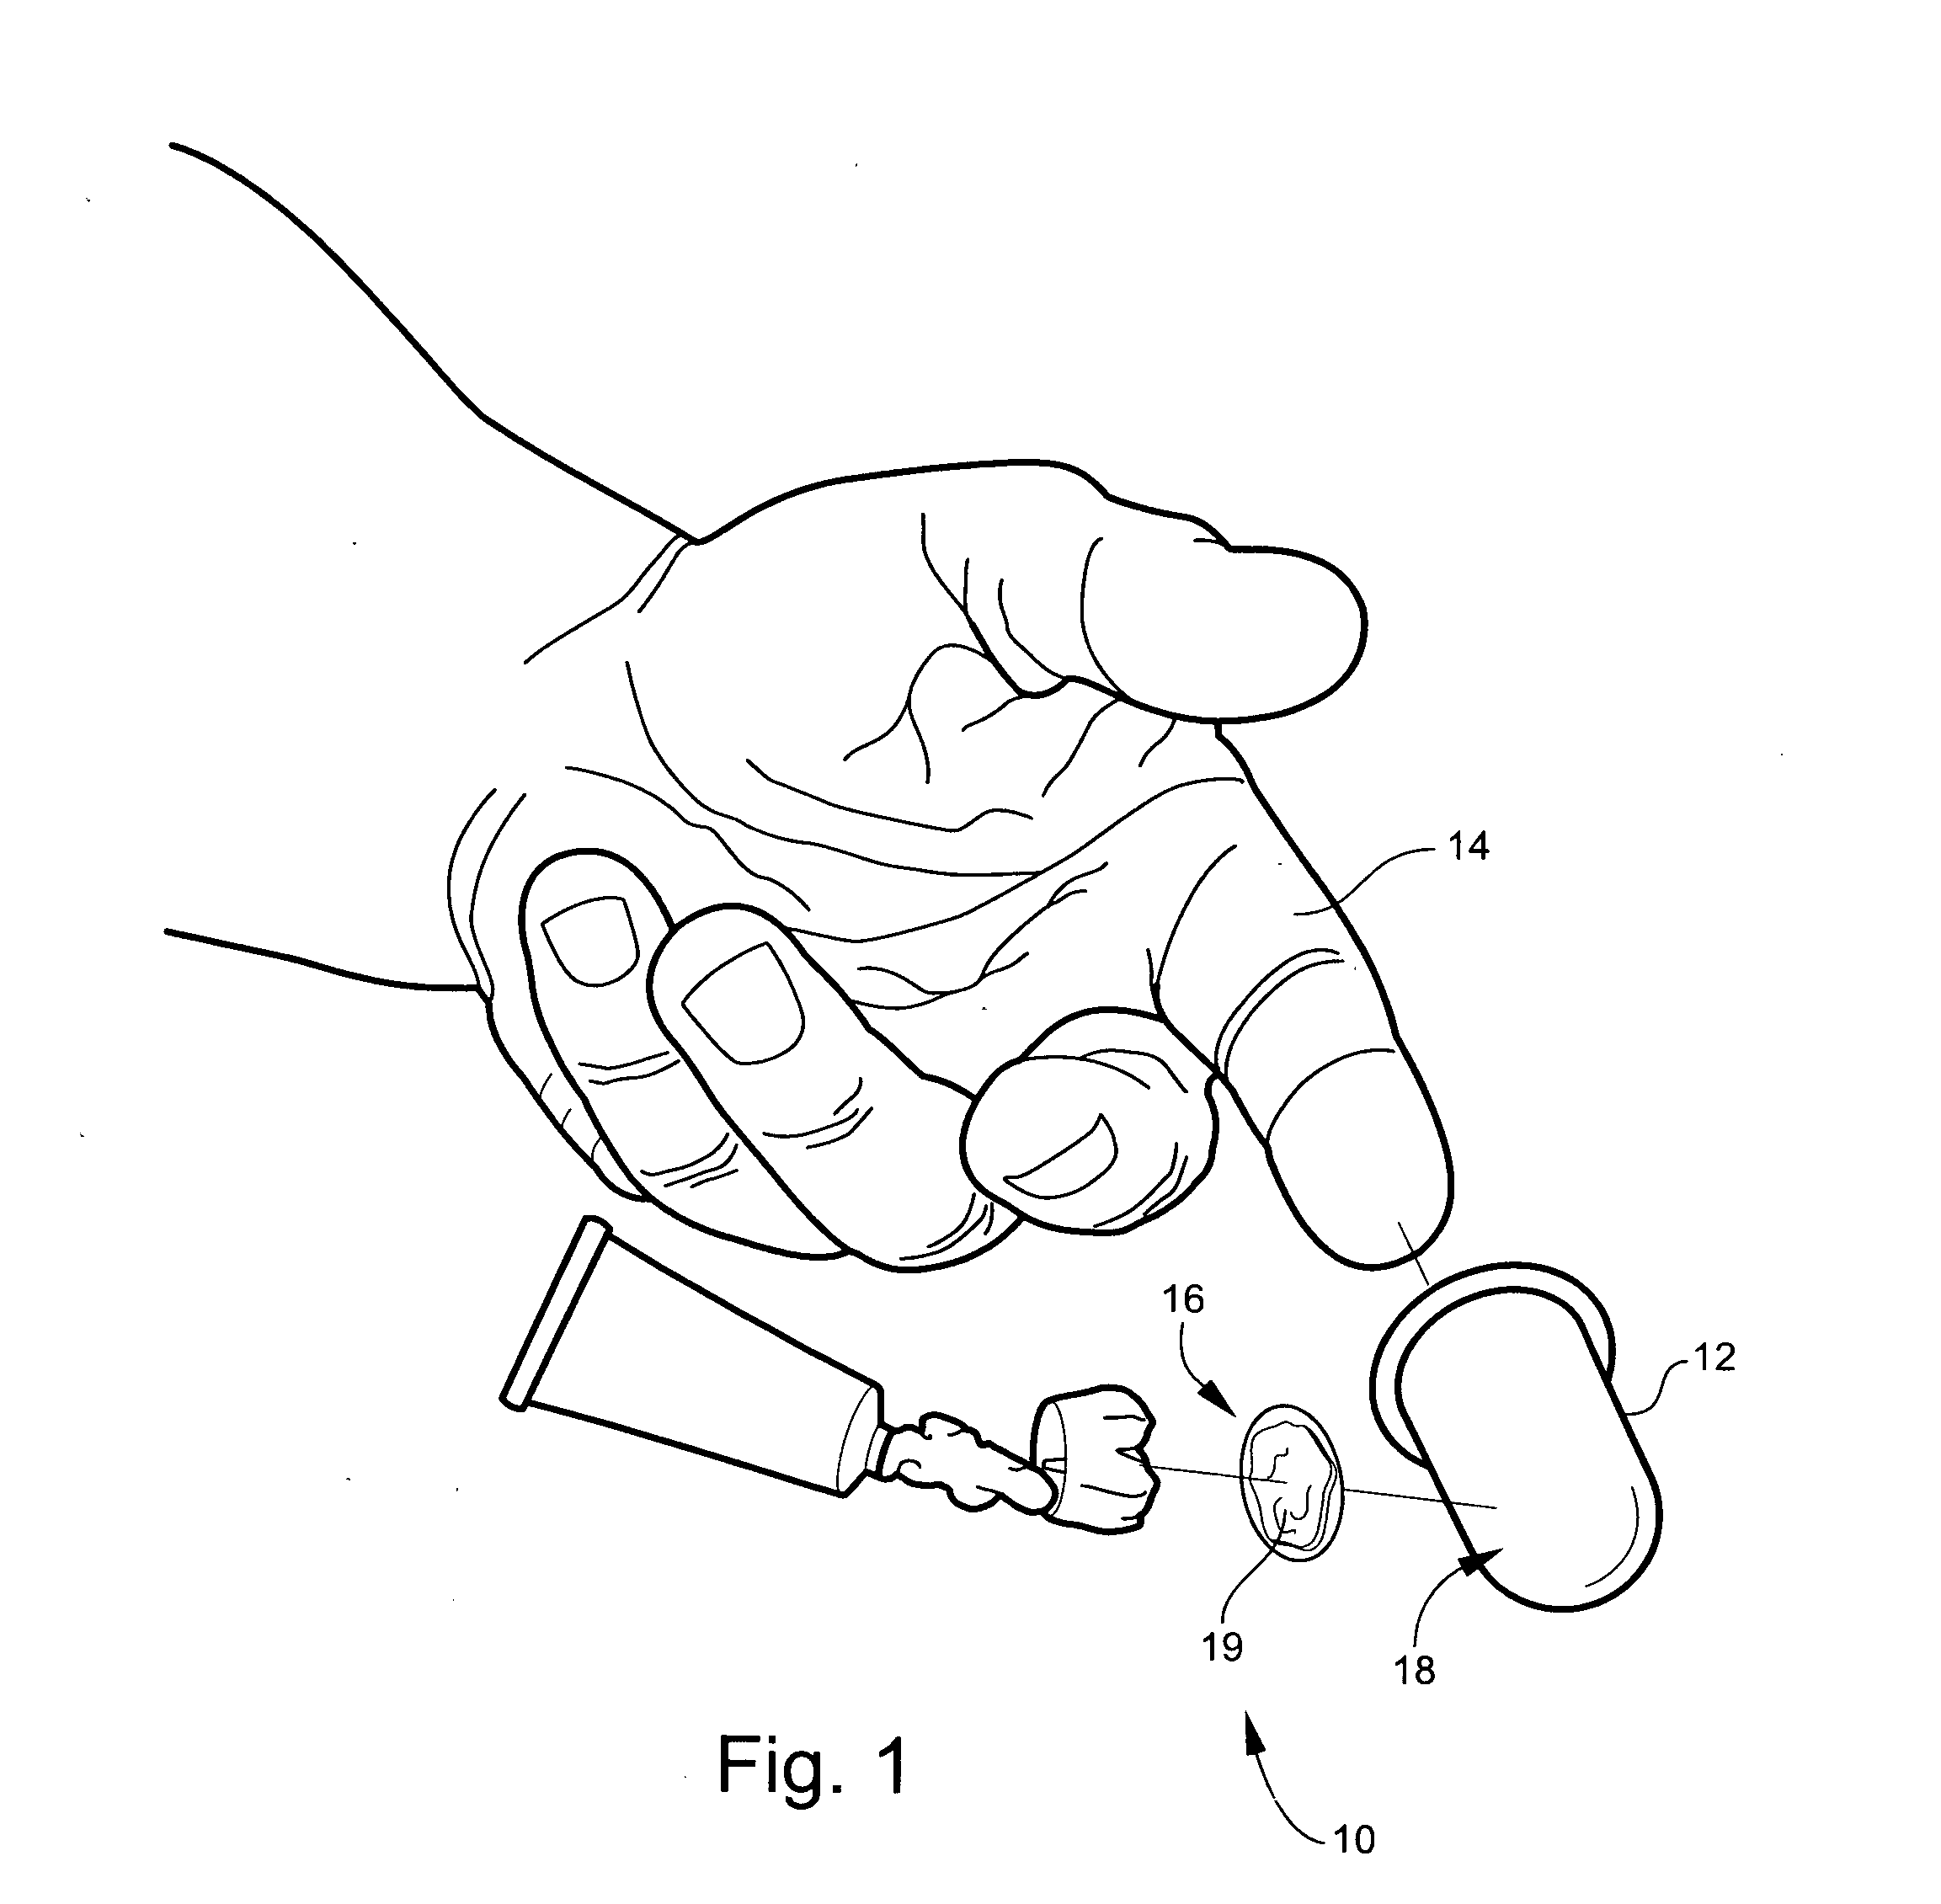 Prosthodontic tool and method for placing and fitting crowns and inlays